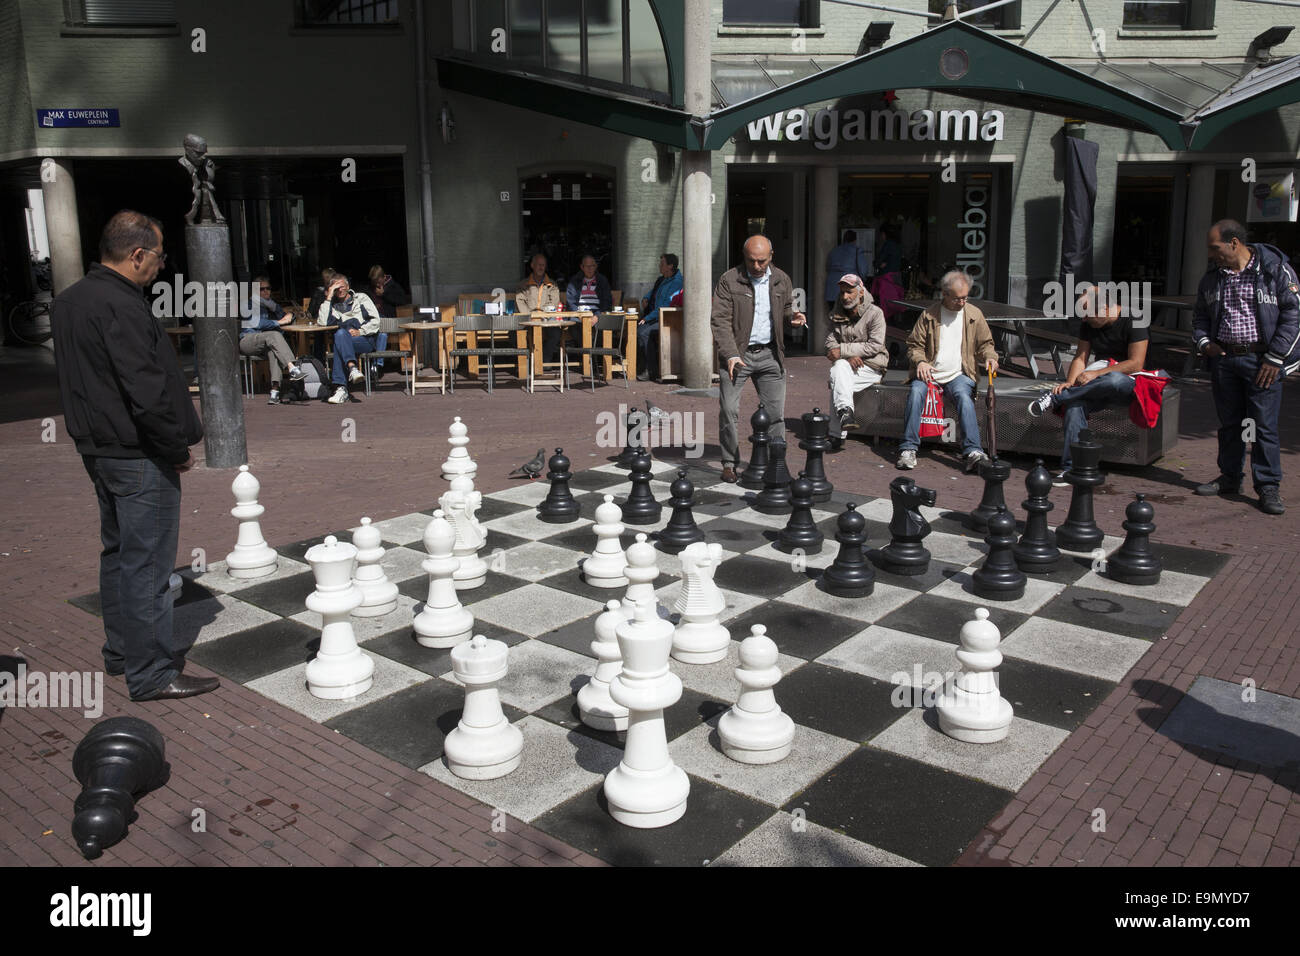 Larger than life playable chess board, Amsterdam, Netherlands. Stock Photo